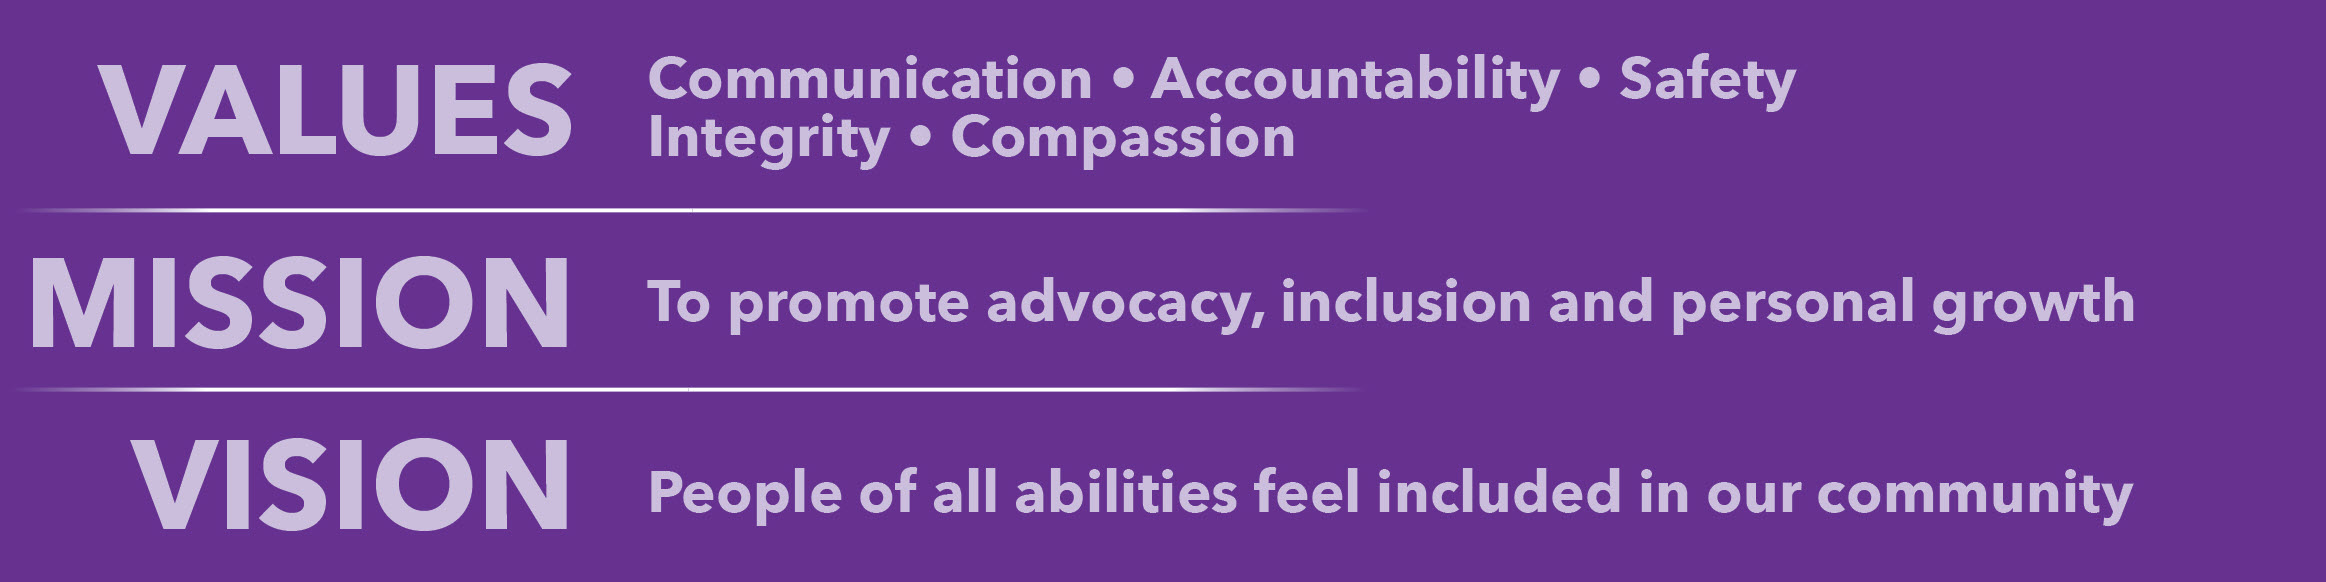 Values: Communication Accountability Safety Integrity Compassion; Mission: To promote advocacy, inclusion and personal growth; Vision: People of all abilities feel included in our community